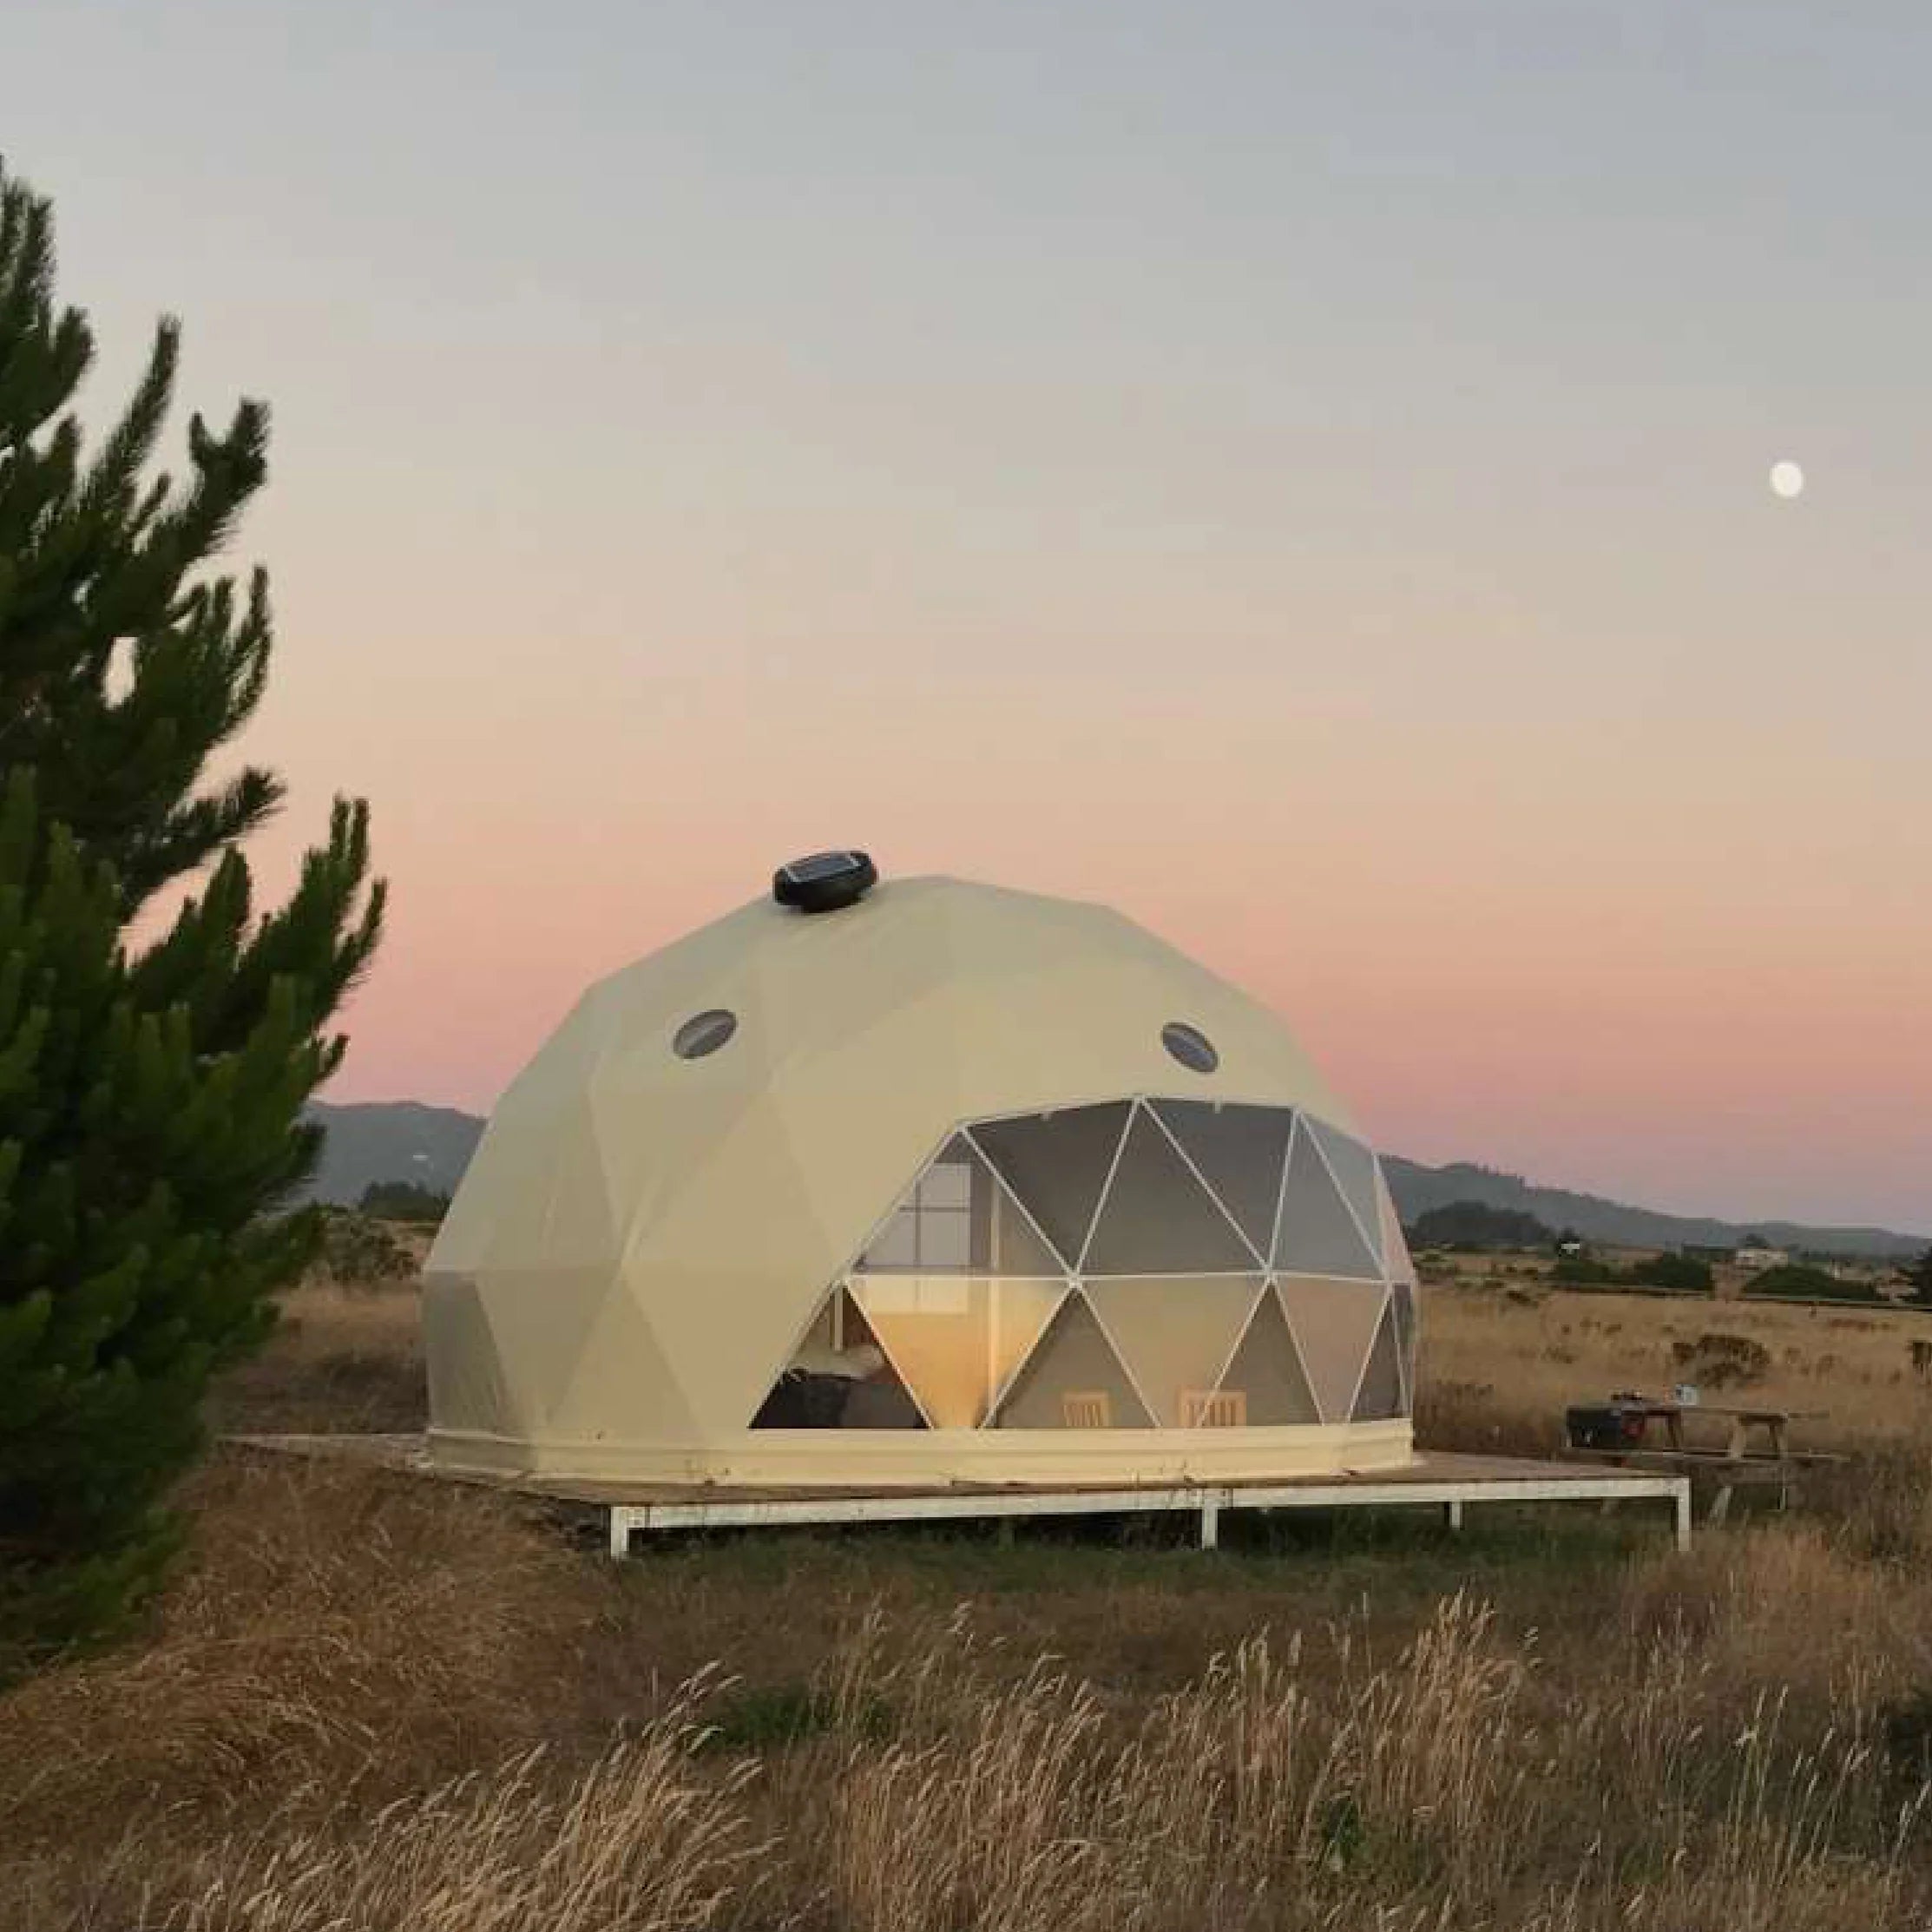 Premium geodesic dome kit for retreats / ADU / glamping / guest